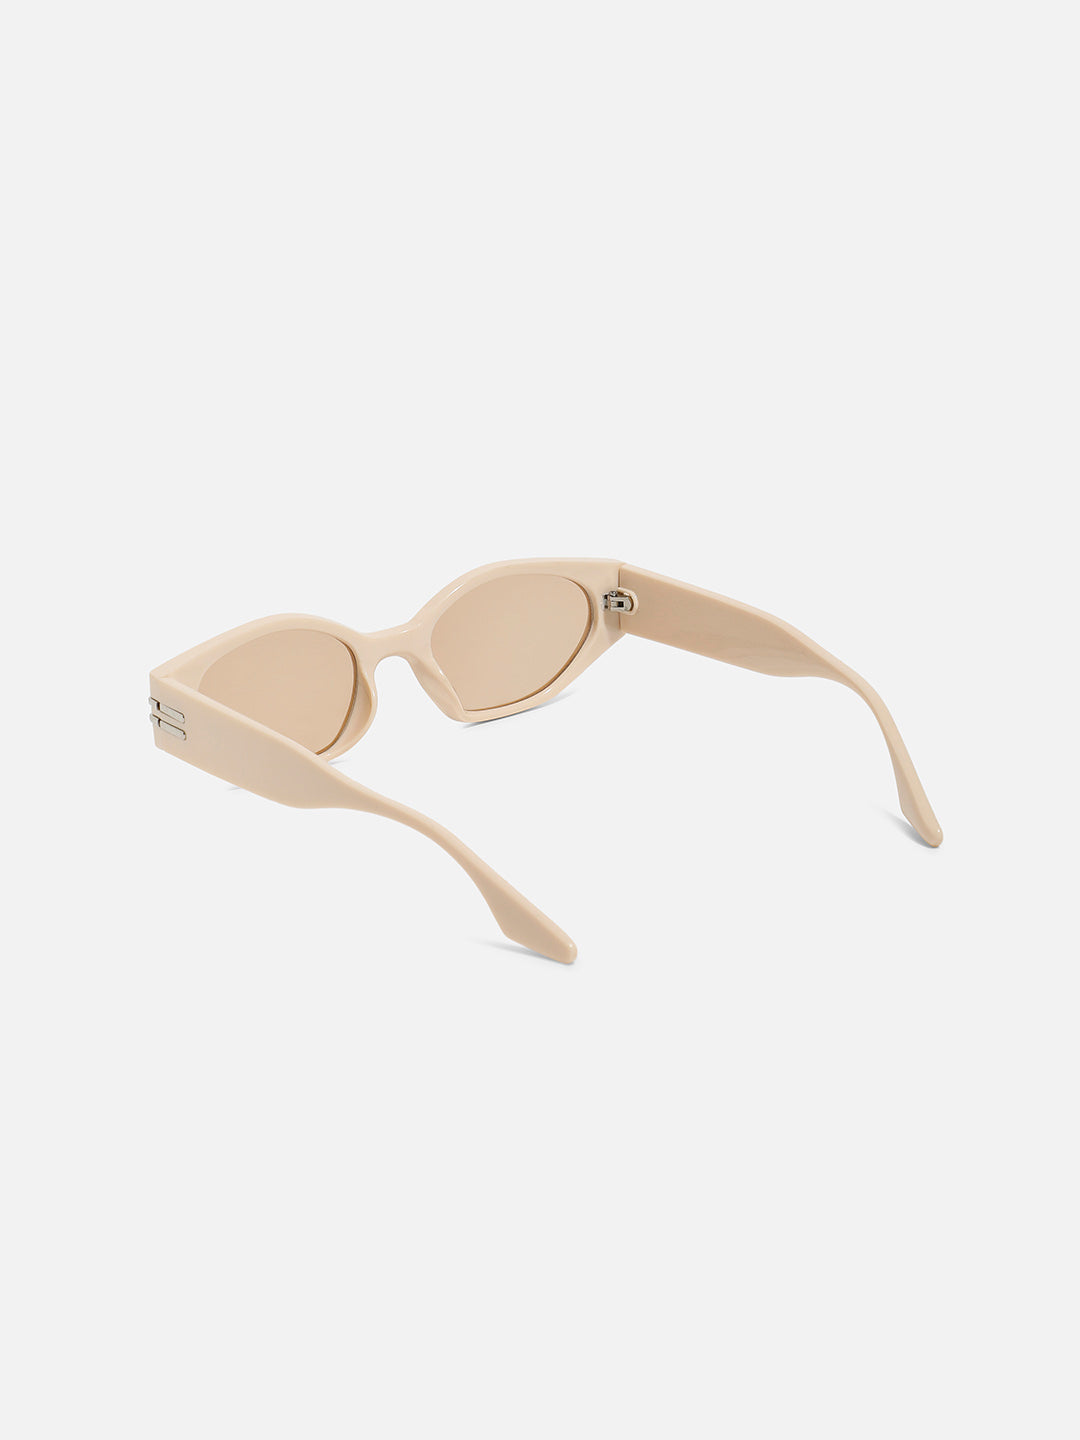 Solid Oval Sunglasses - Beige